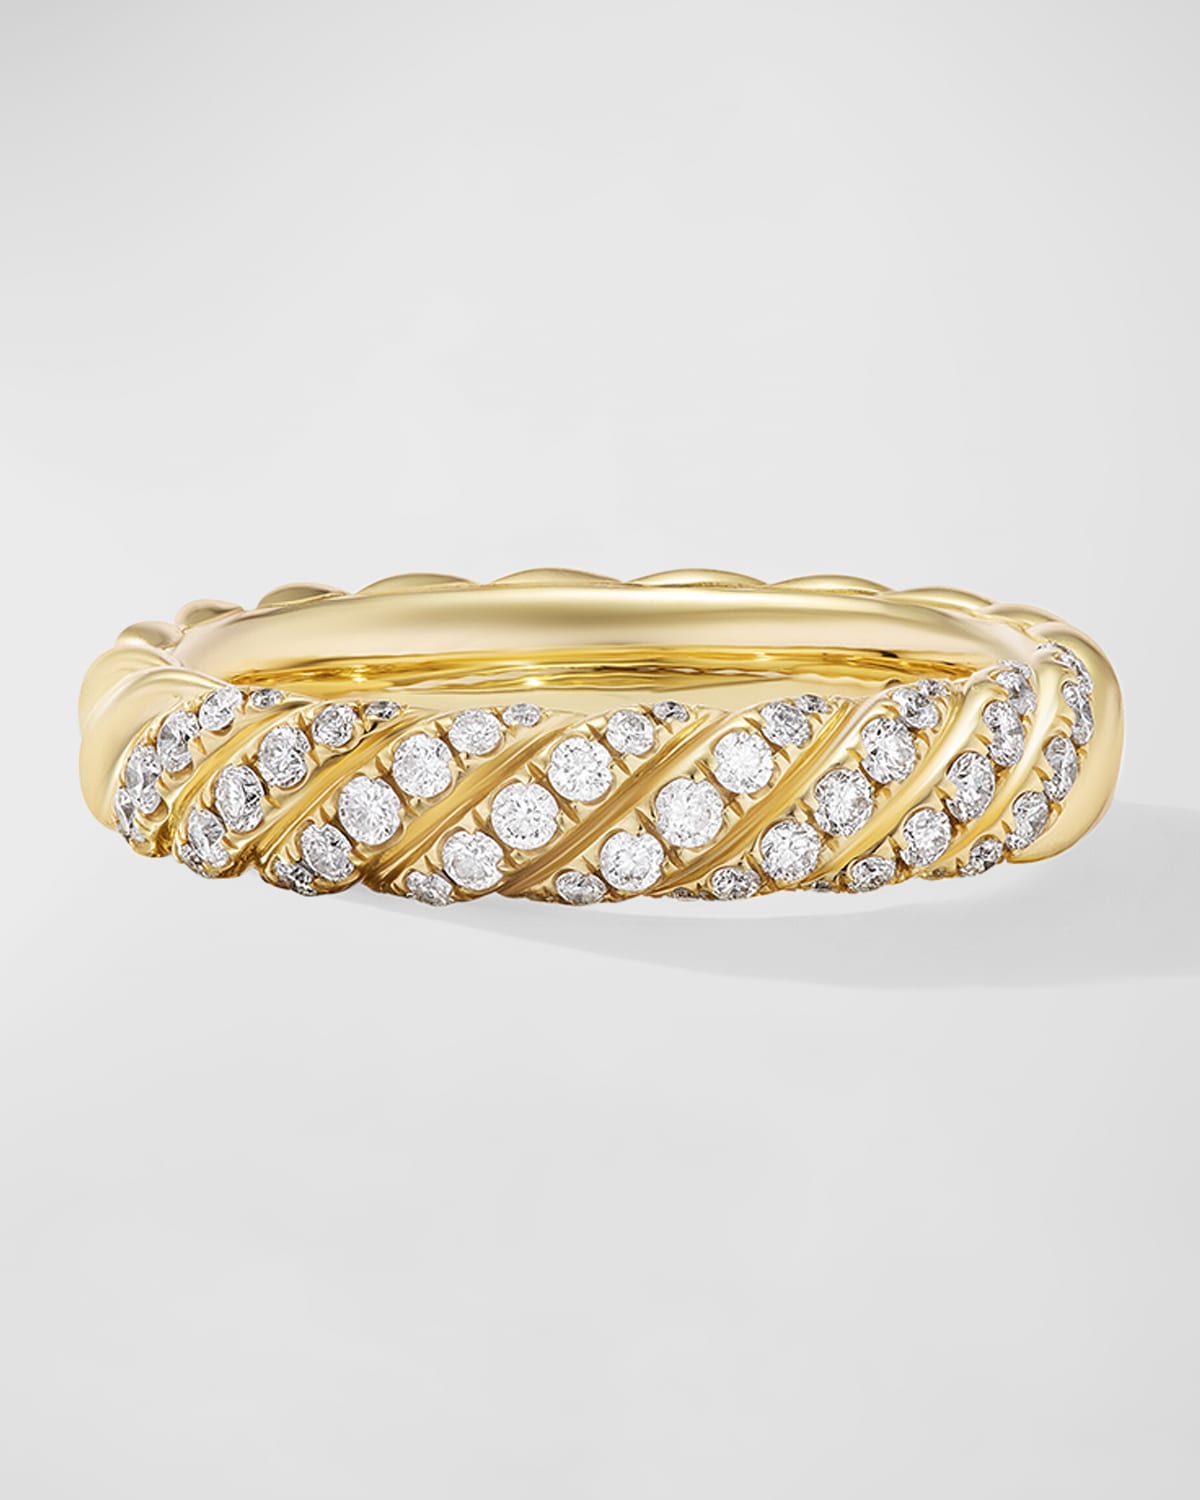 David Yurman Sculpted Cable Band Ring with Diamonds in 18K Gold, 4.5mm, Size 5